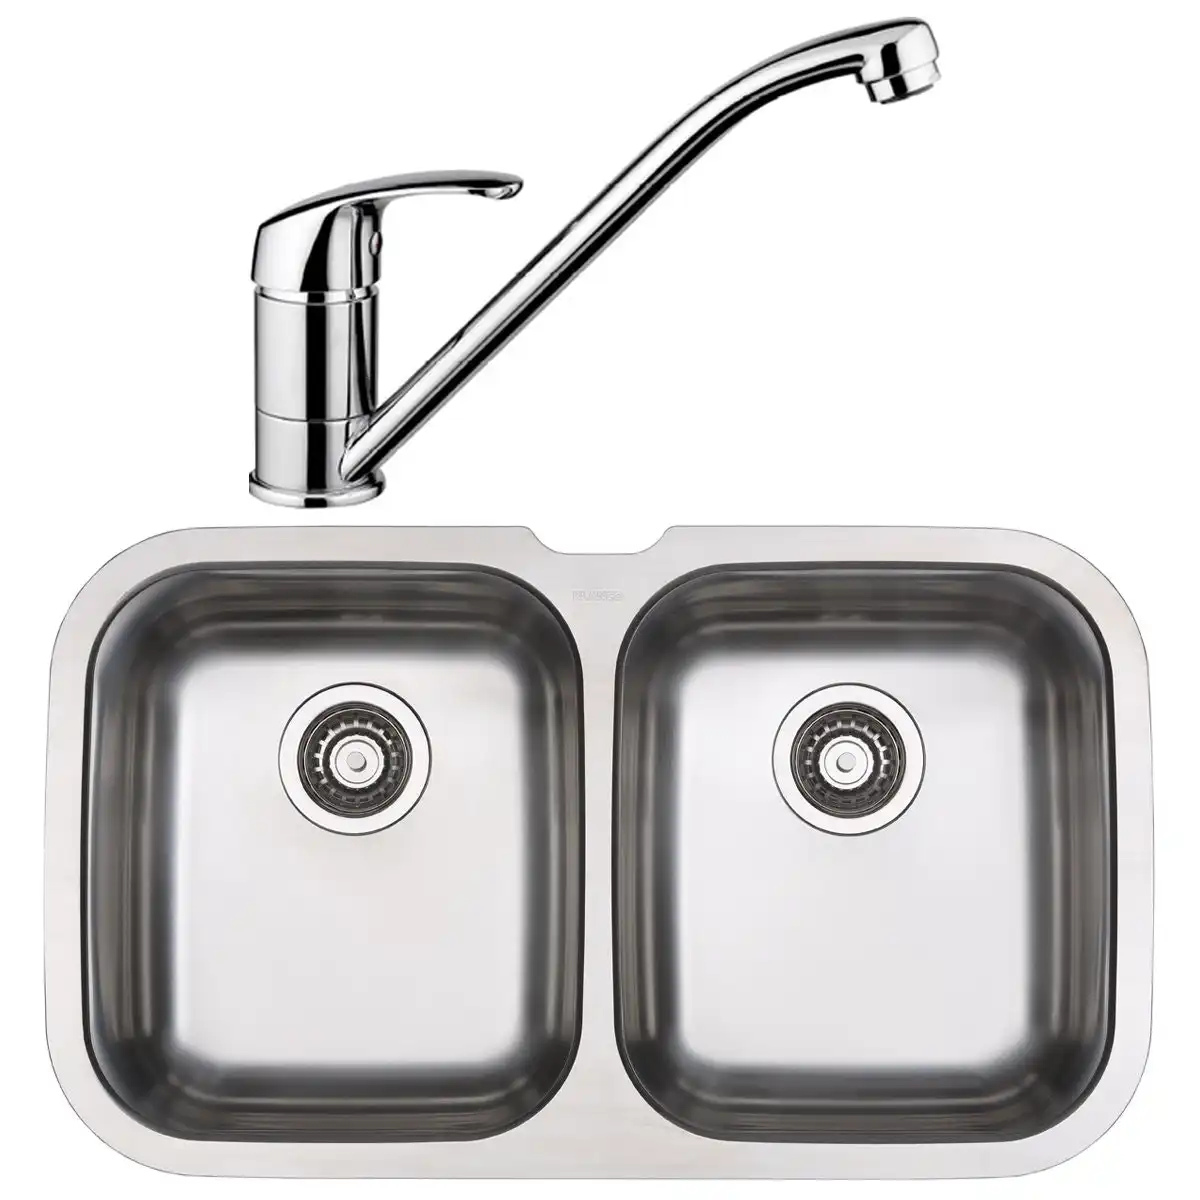 Blanco Double Bowl Undermount Sink and Tap